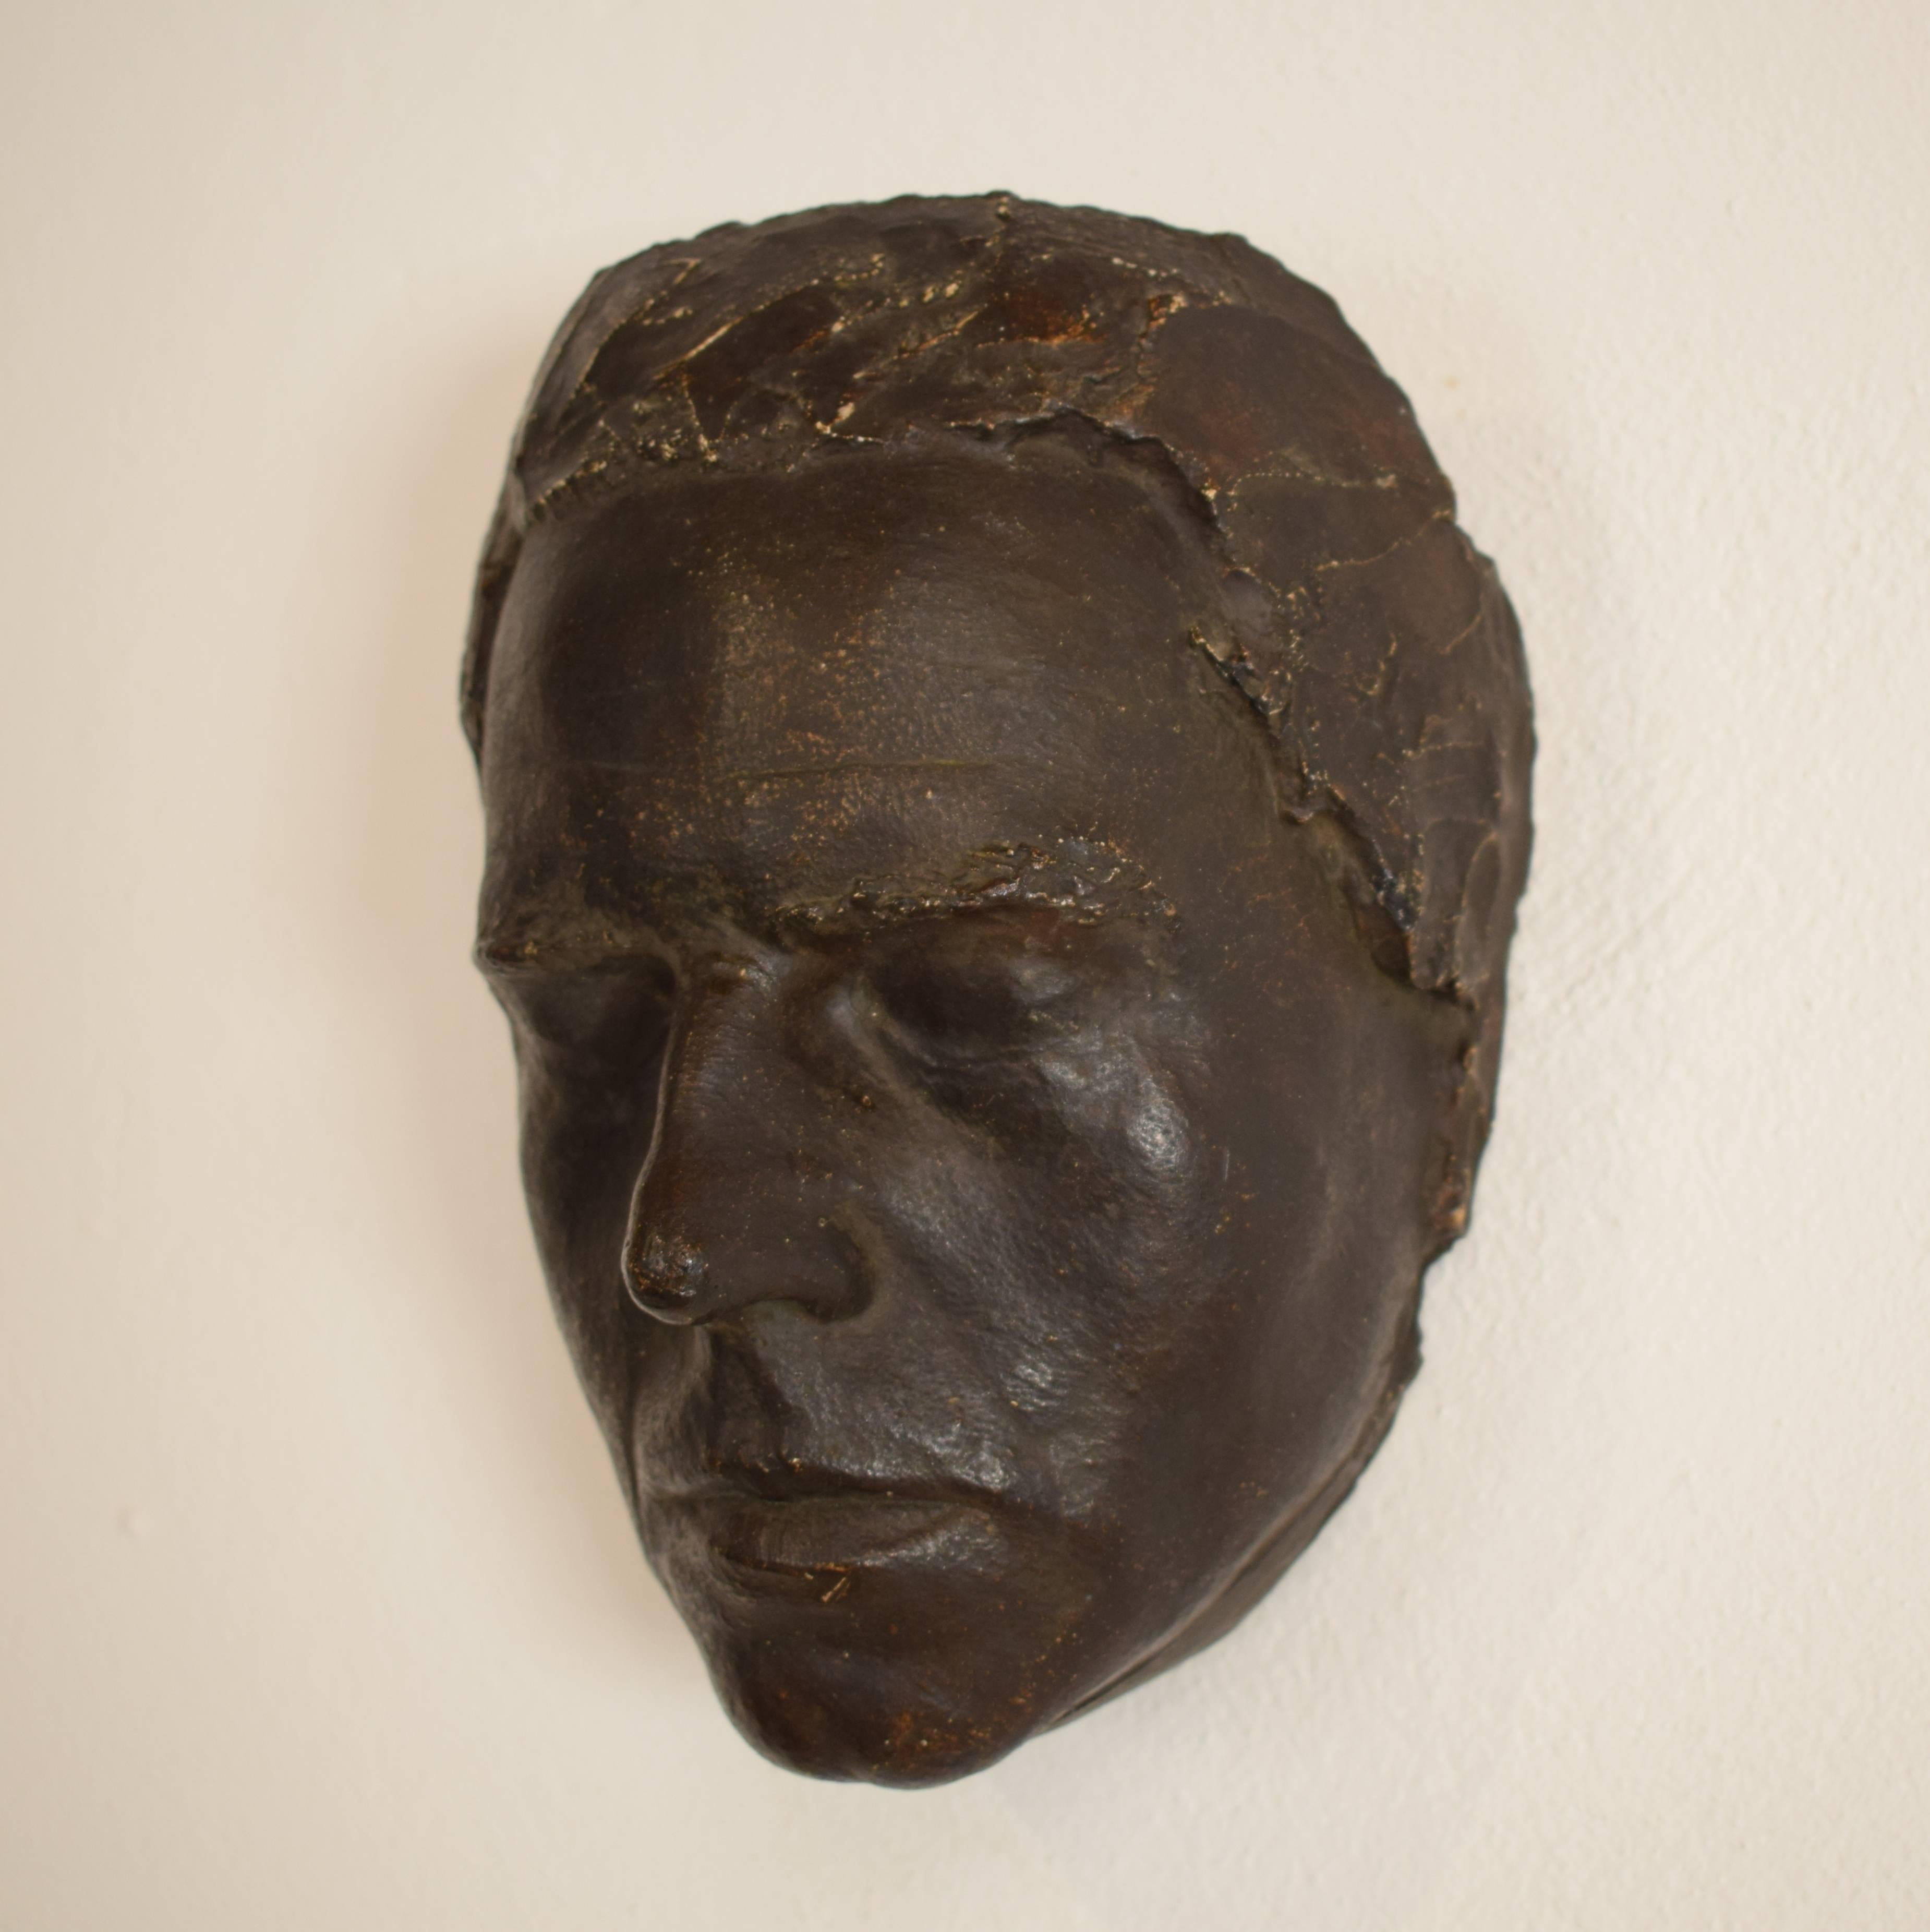 This early 20th century painted plaster mask by Karl Koch when he study at the academy of Art in Leipzig. He made it in 1910.